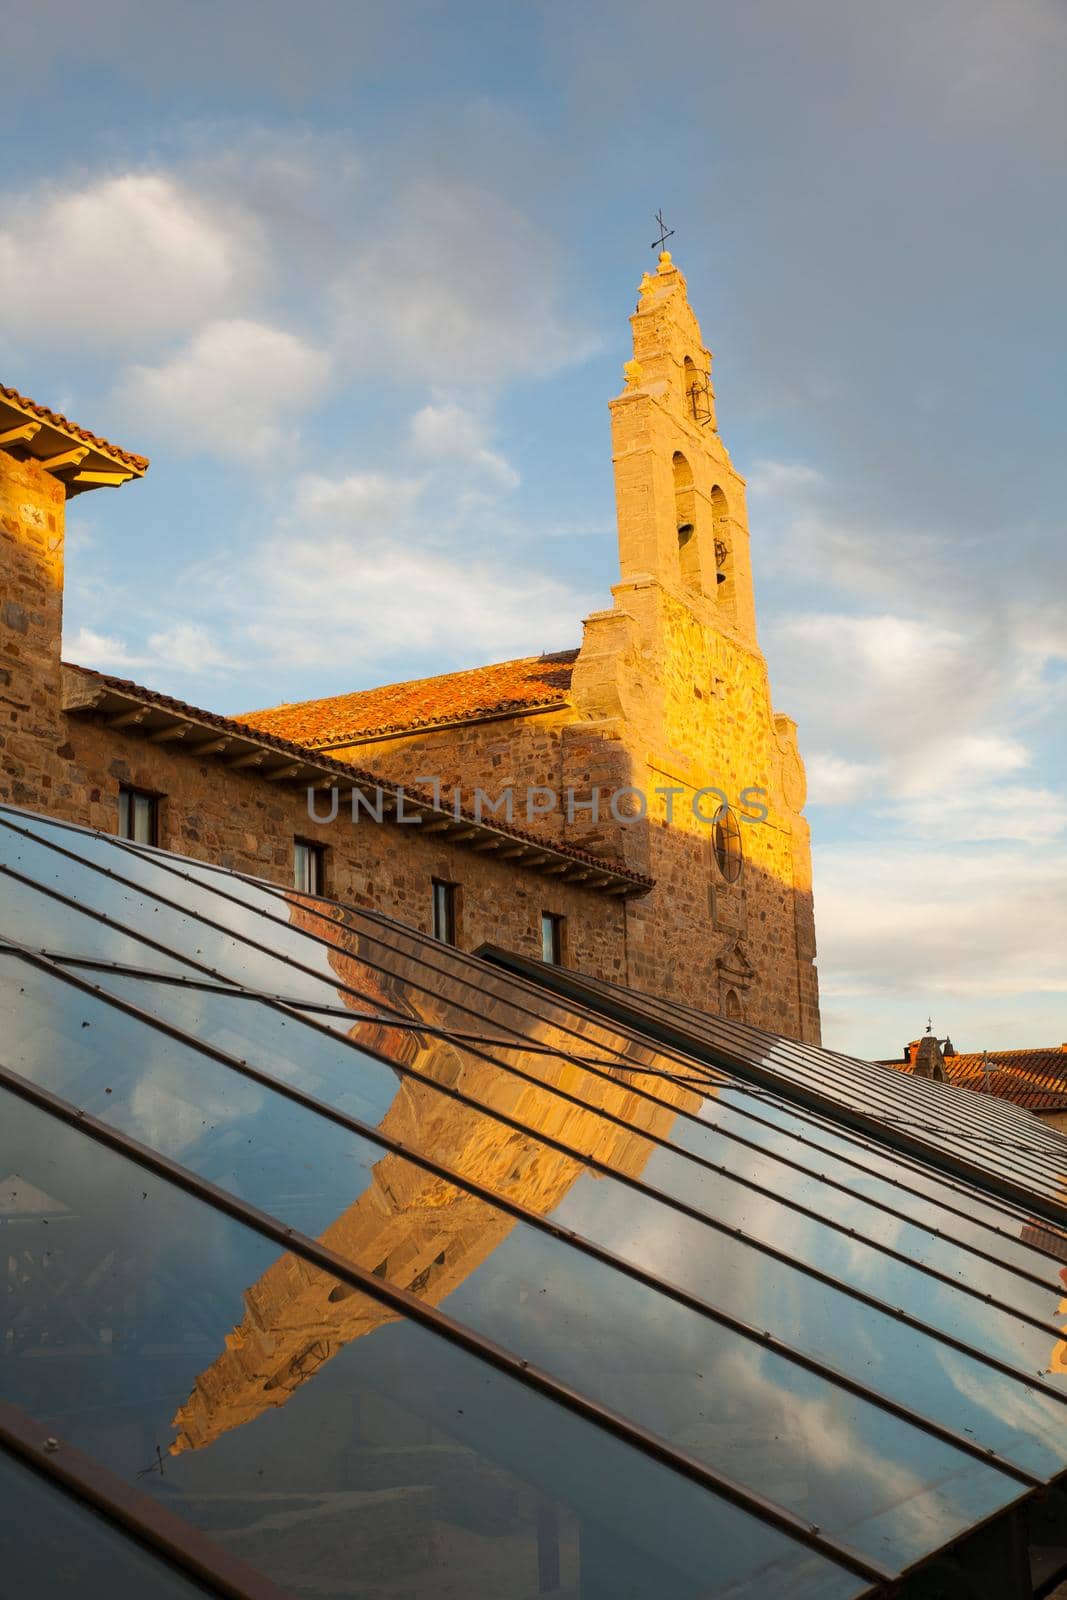 View of the San Francesco Church reflected on the glass cover of the museum in Astorga, Spain